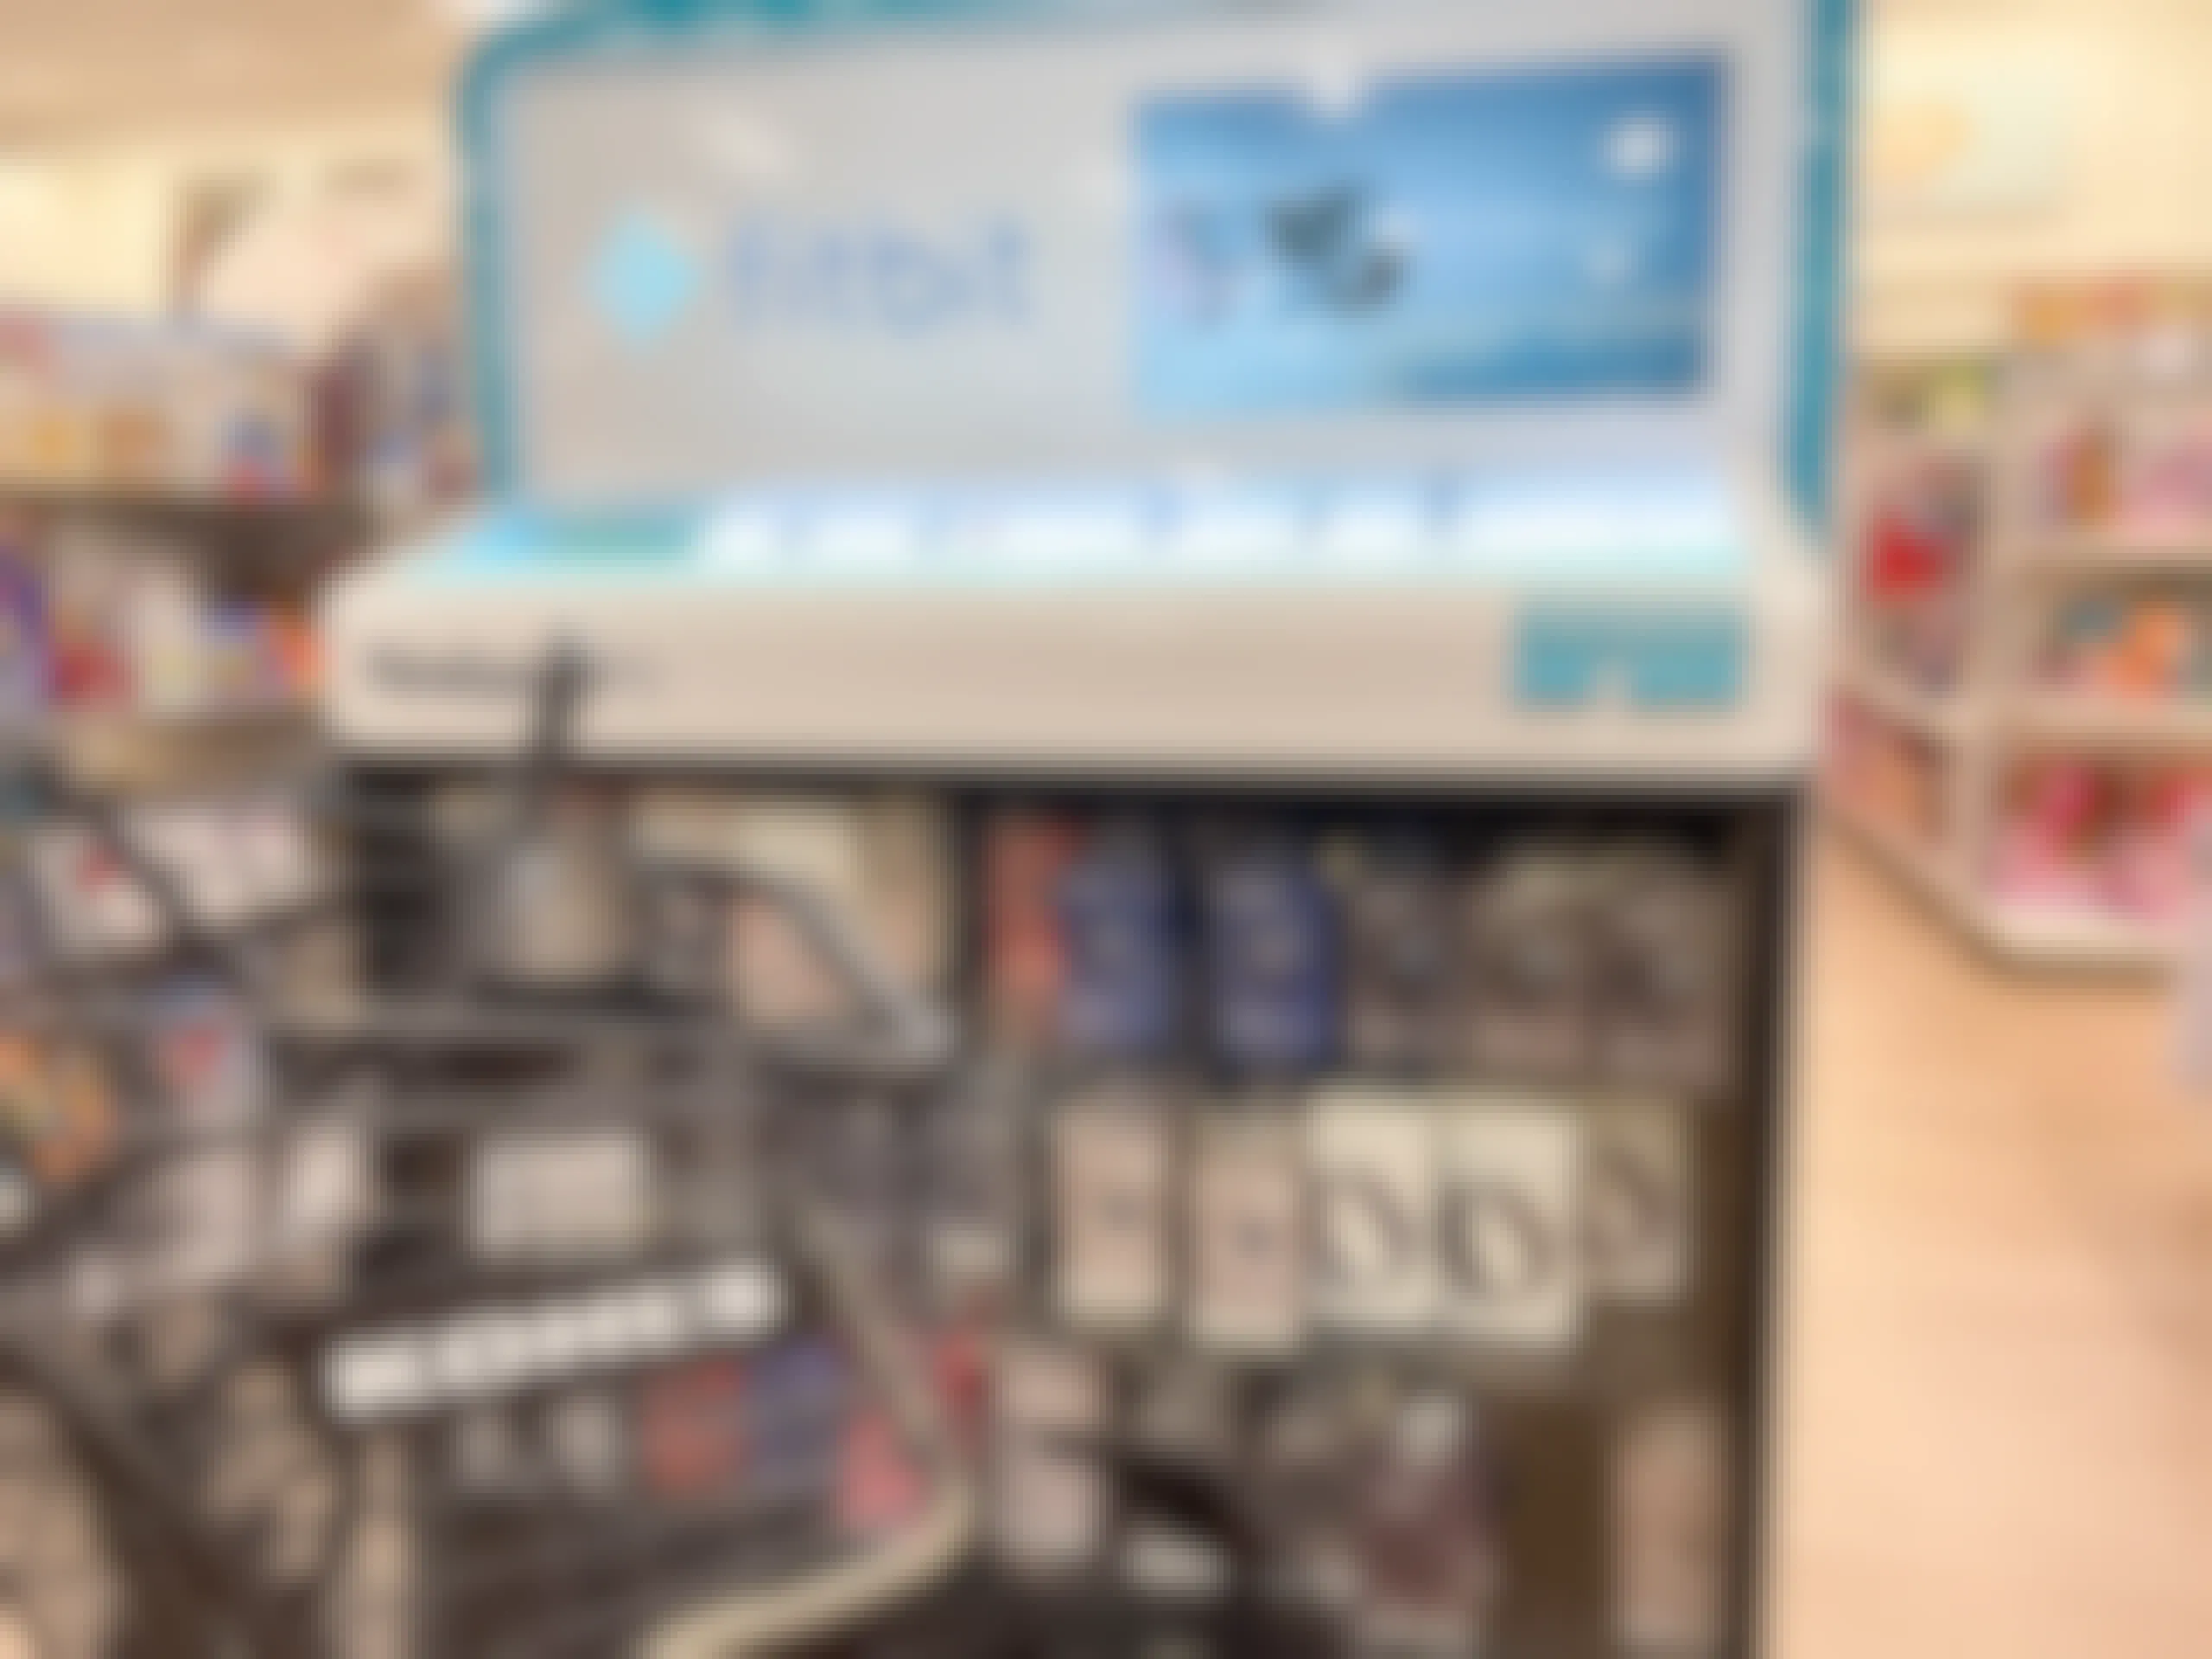 fitbit display in store with kohls cart